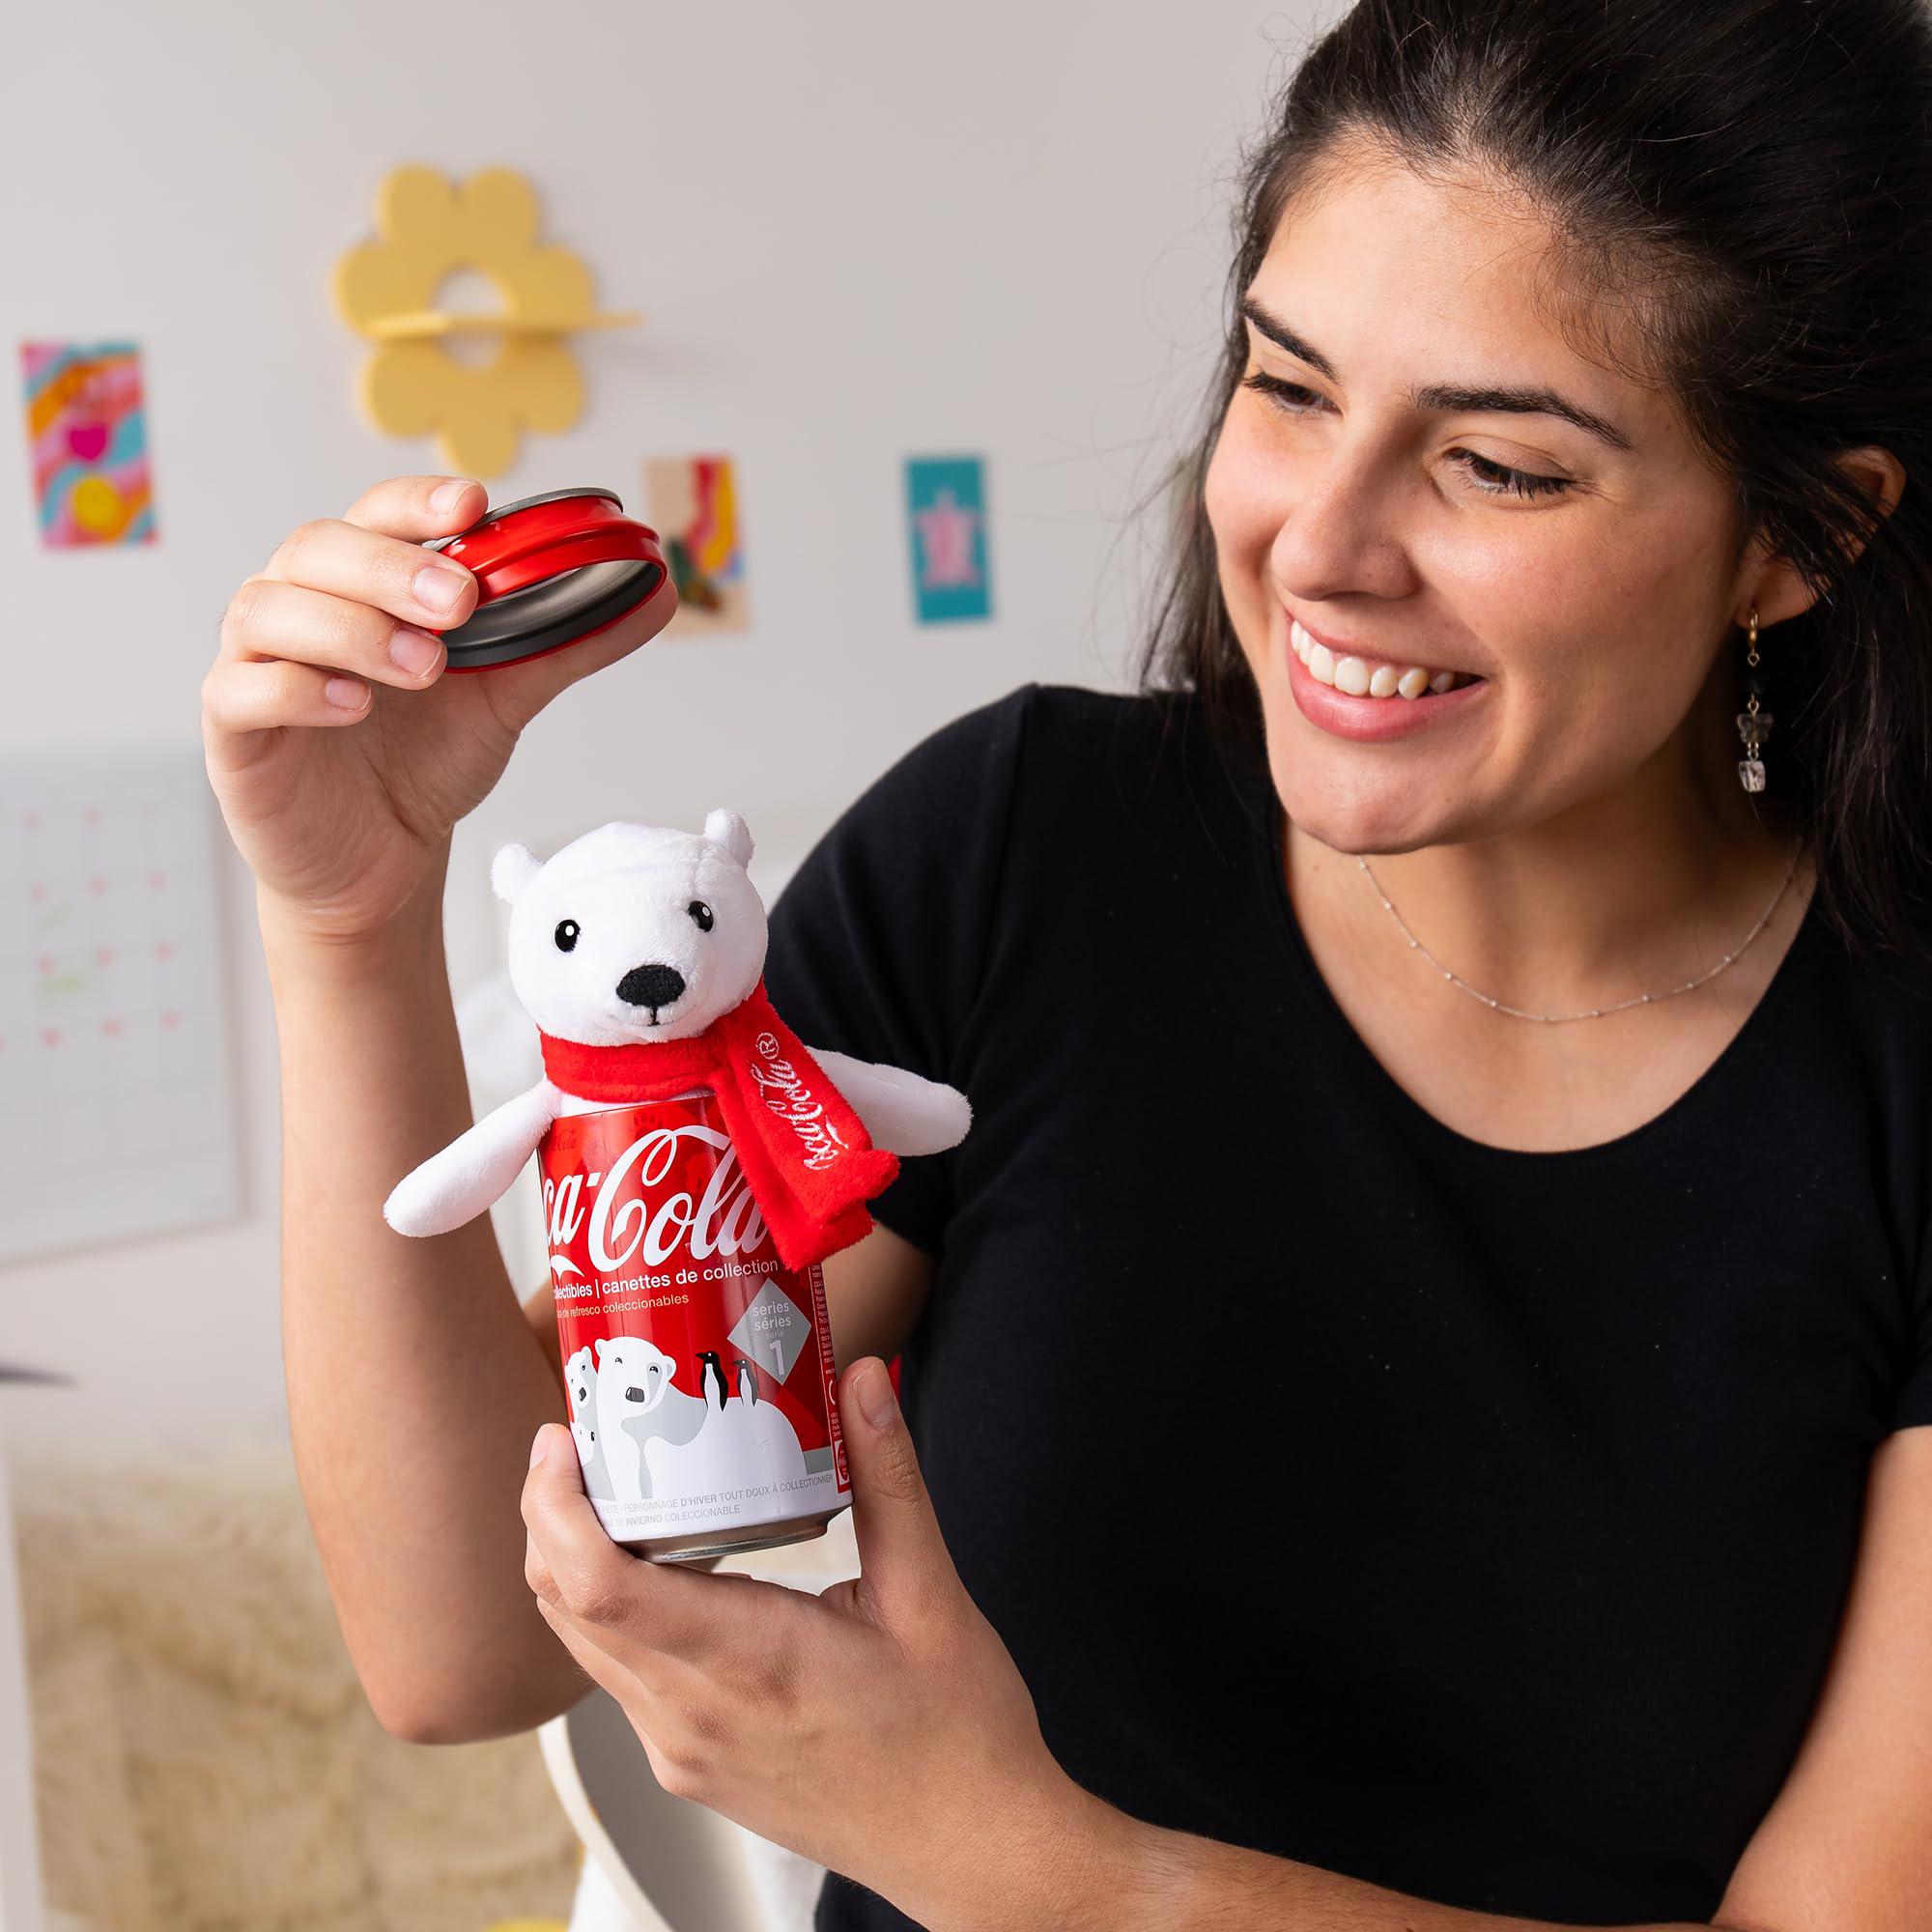 coca-cola pop cans! collectible 5" plush stuffed animal in 12oz can - character will vary - collect them all!